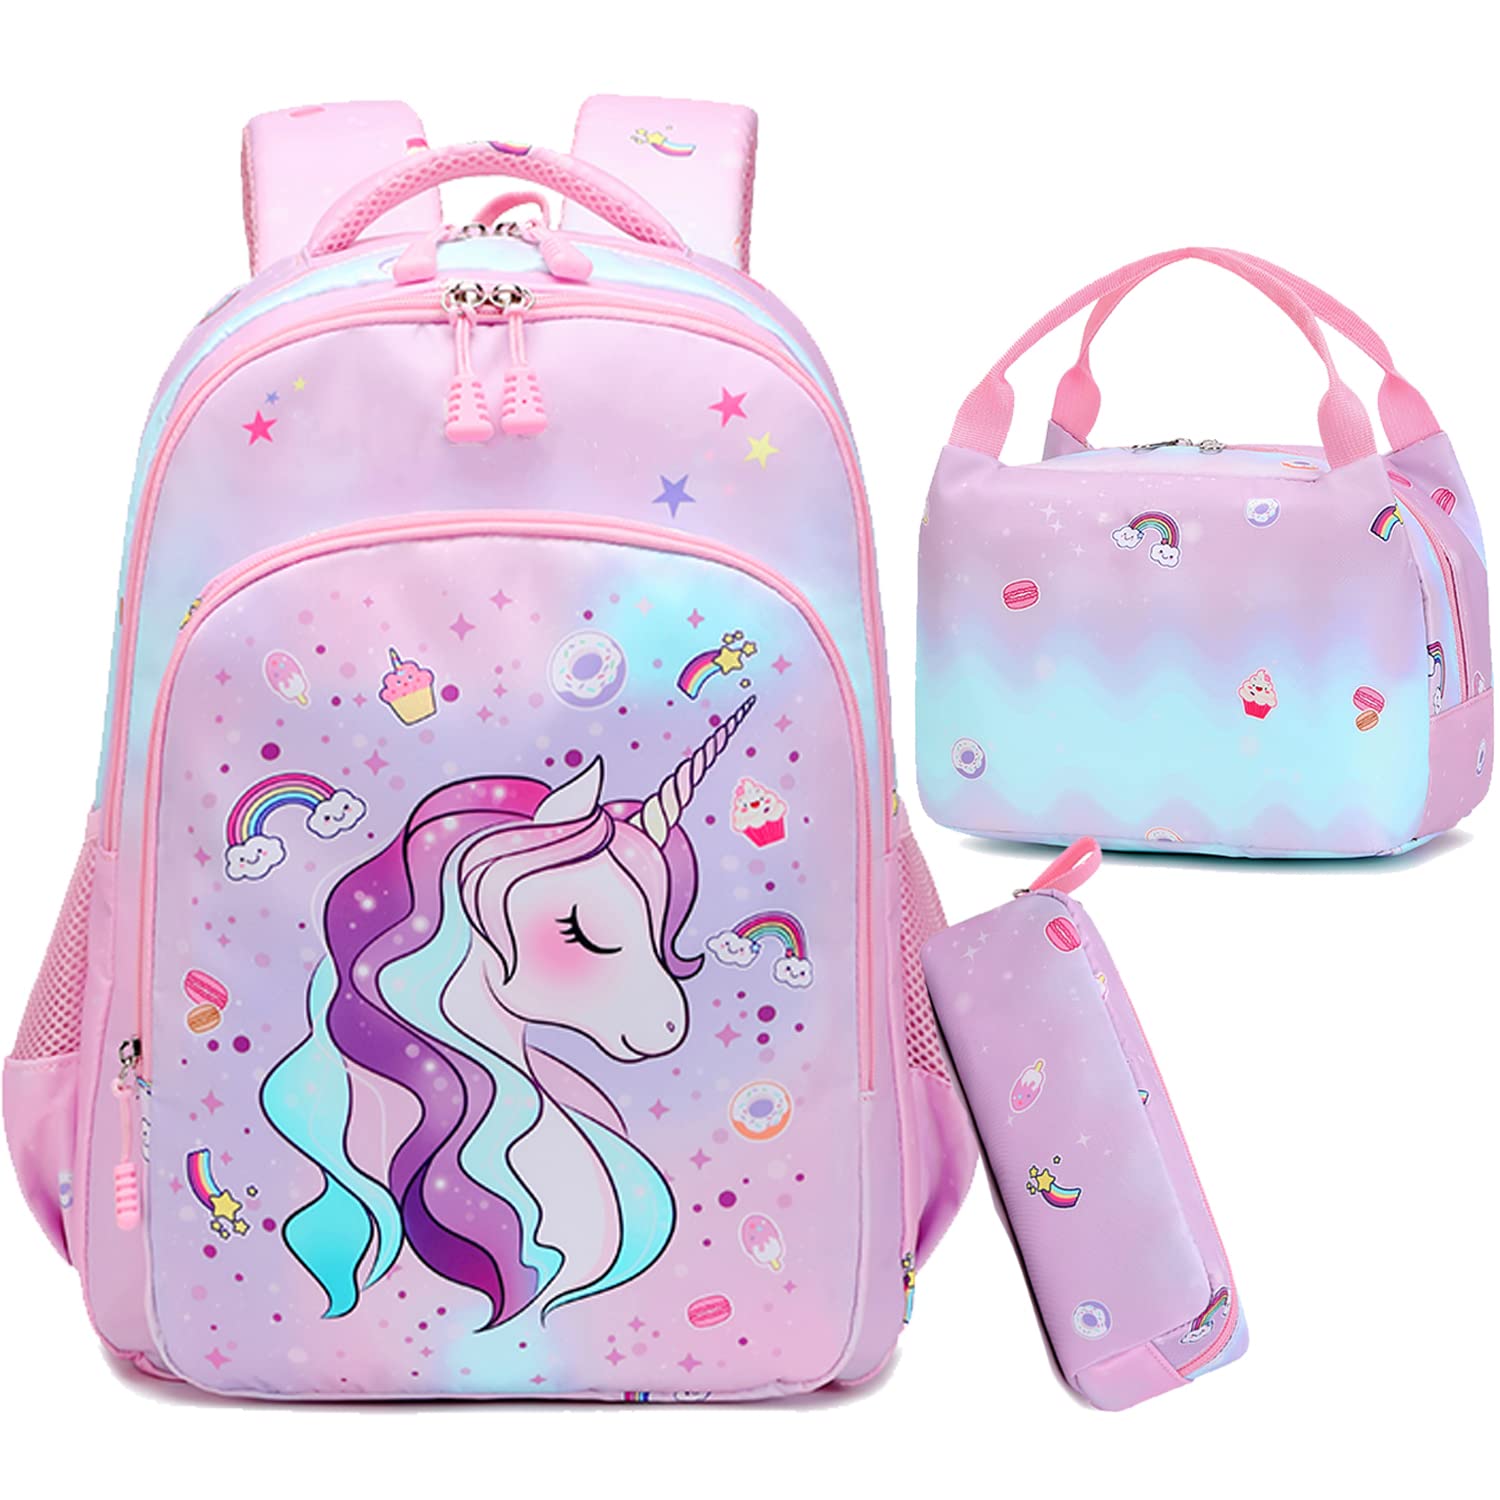 Unicorn Backpack for Girls School Backpack for Girls Unicorn Bookbag School Bag Set for Elementary Back to School on Sale At Amazon - Back To School Deal